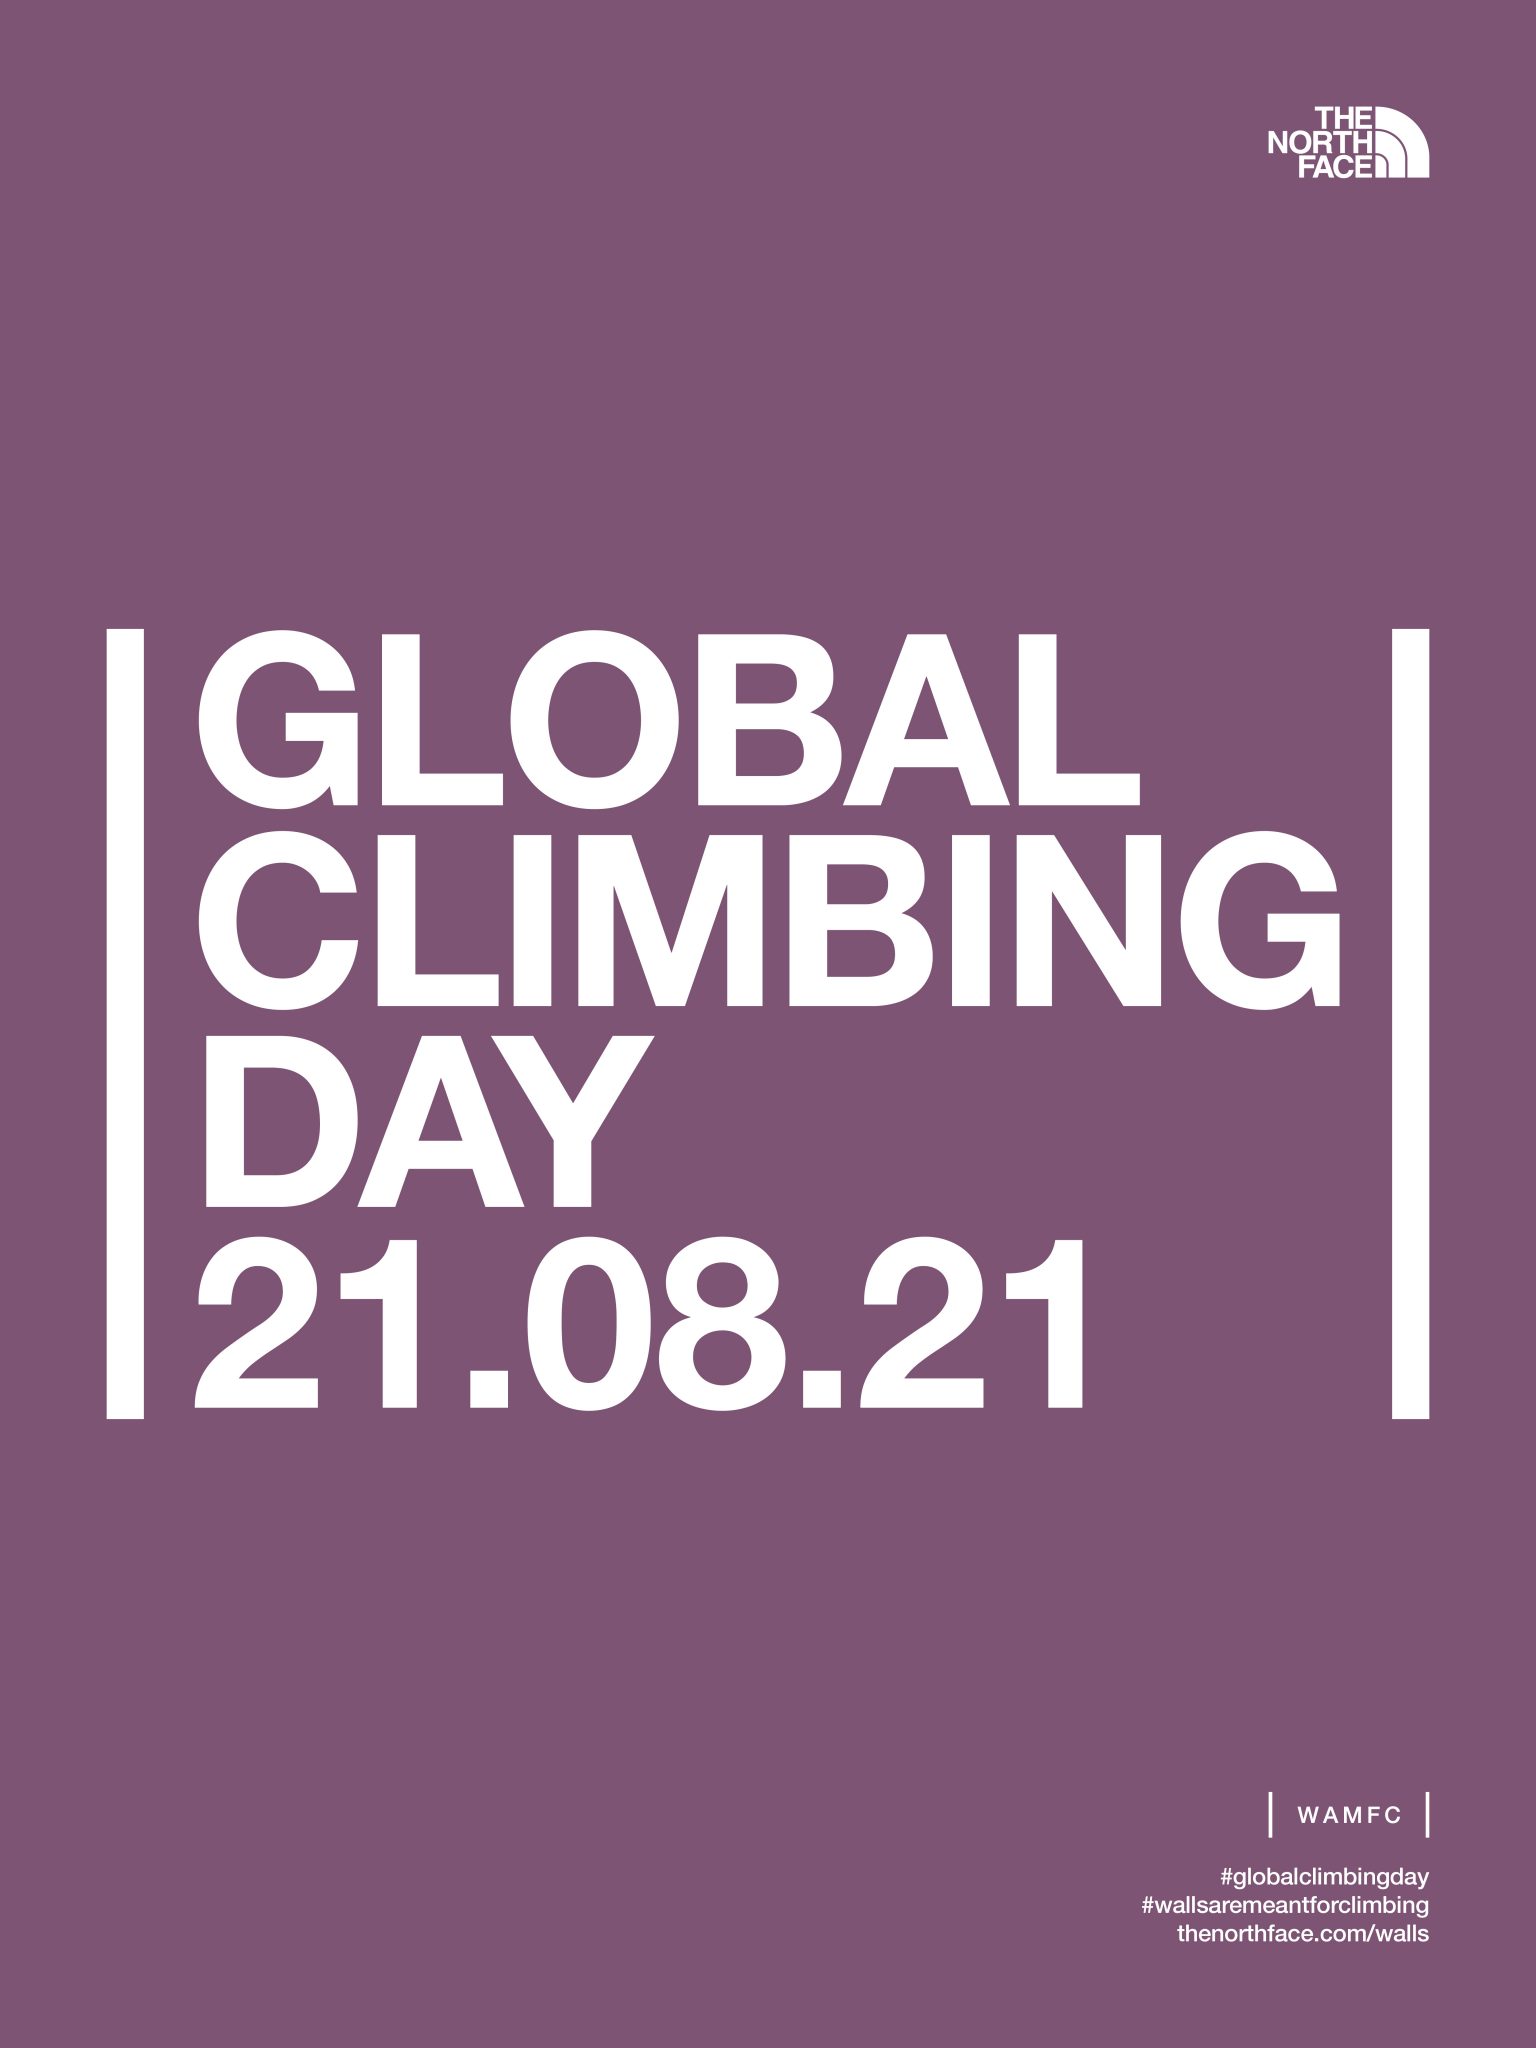 THE NORTH FACE GLOBAL CLIMBING DAY Verge Magazine